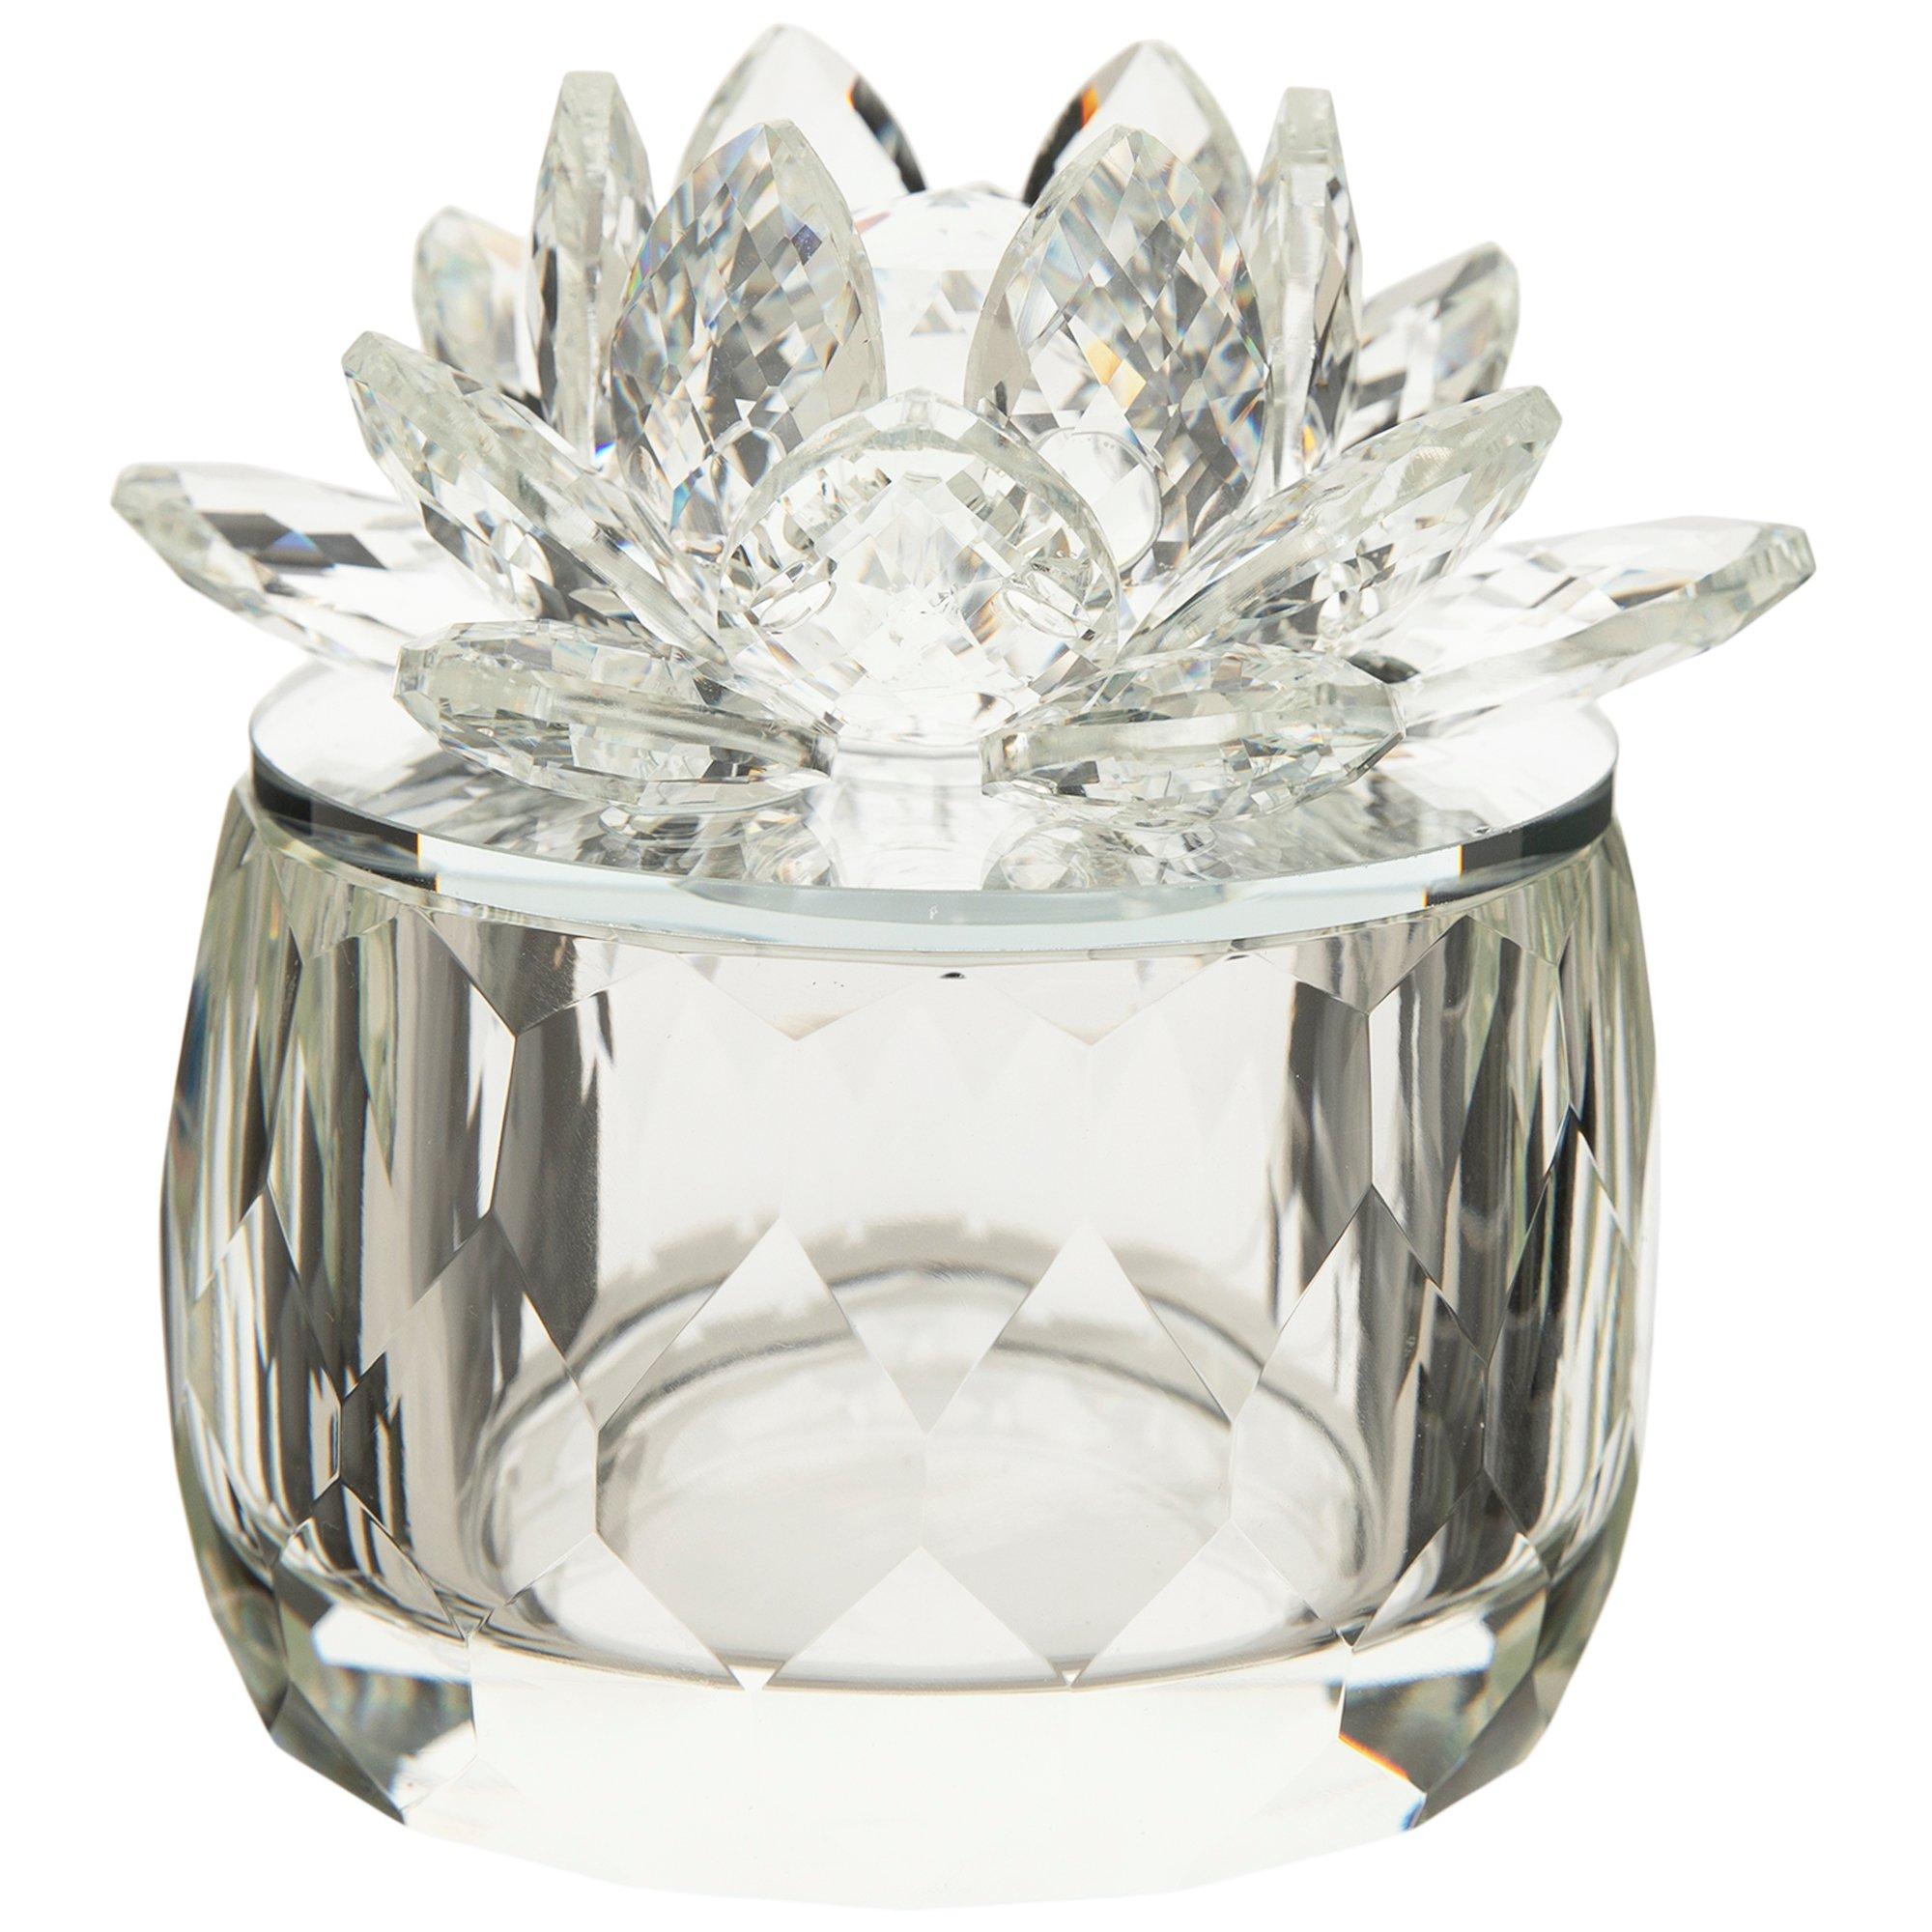 Cristalli Puthod Crystal Ring Box With Silver Plate Decorative Flower Lid 